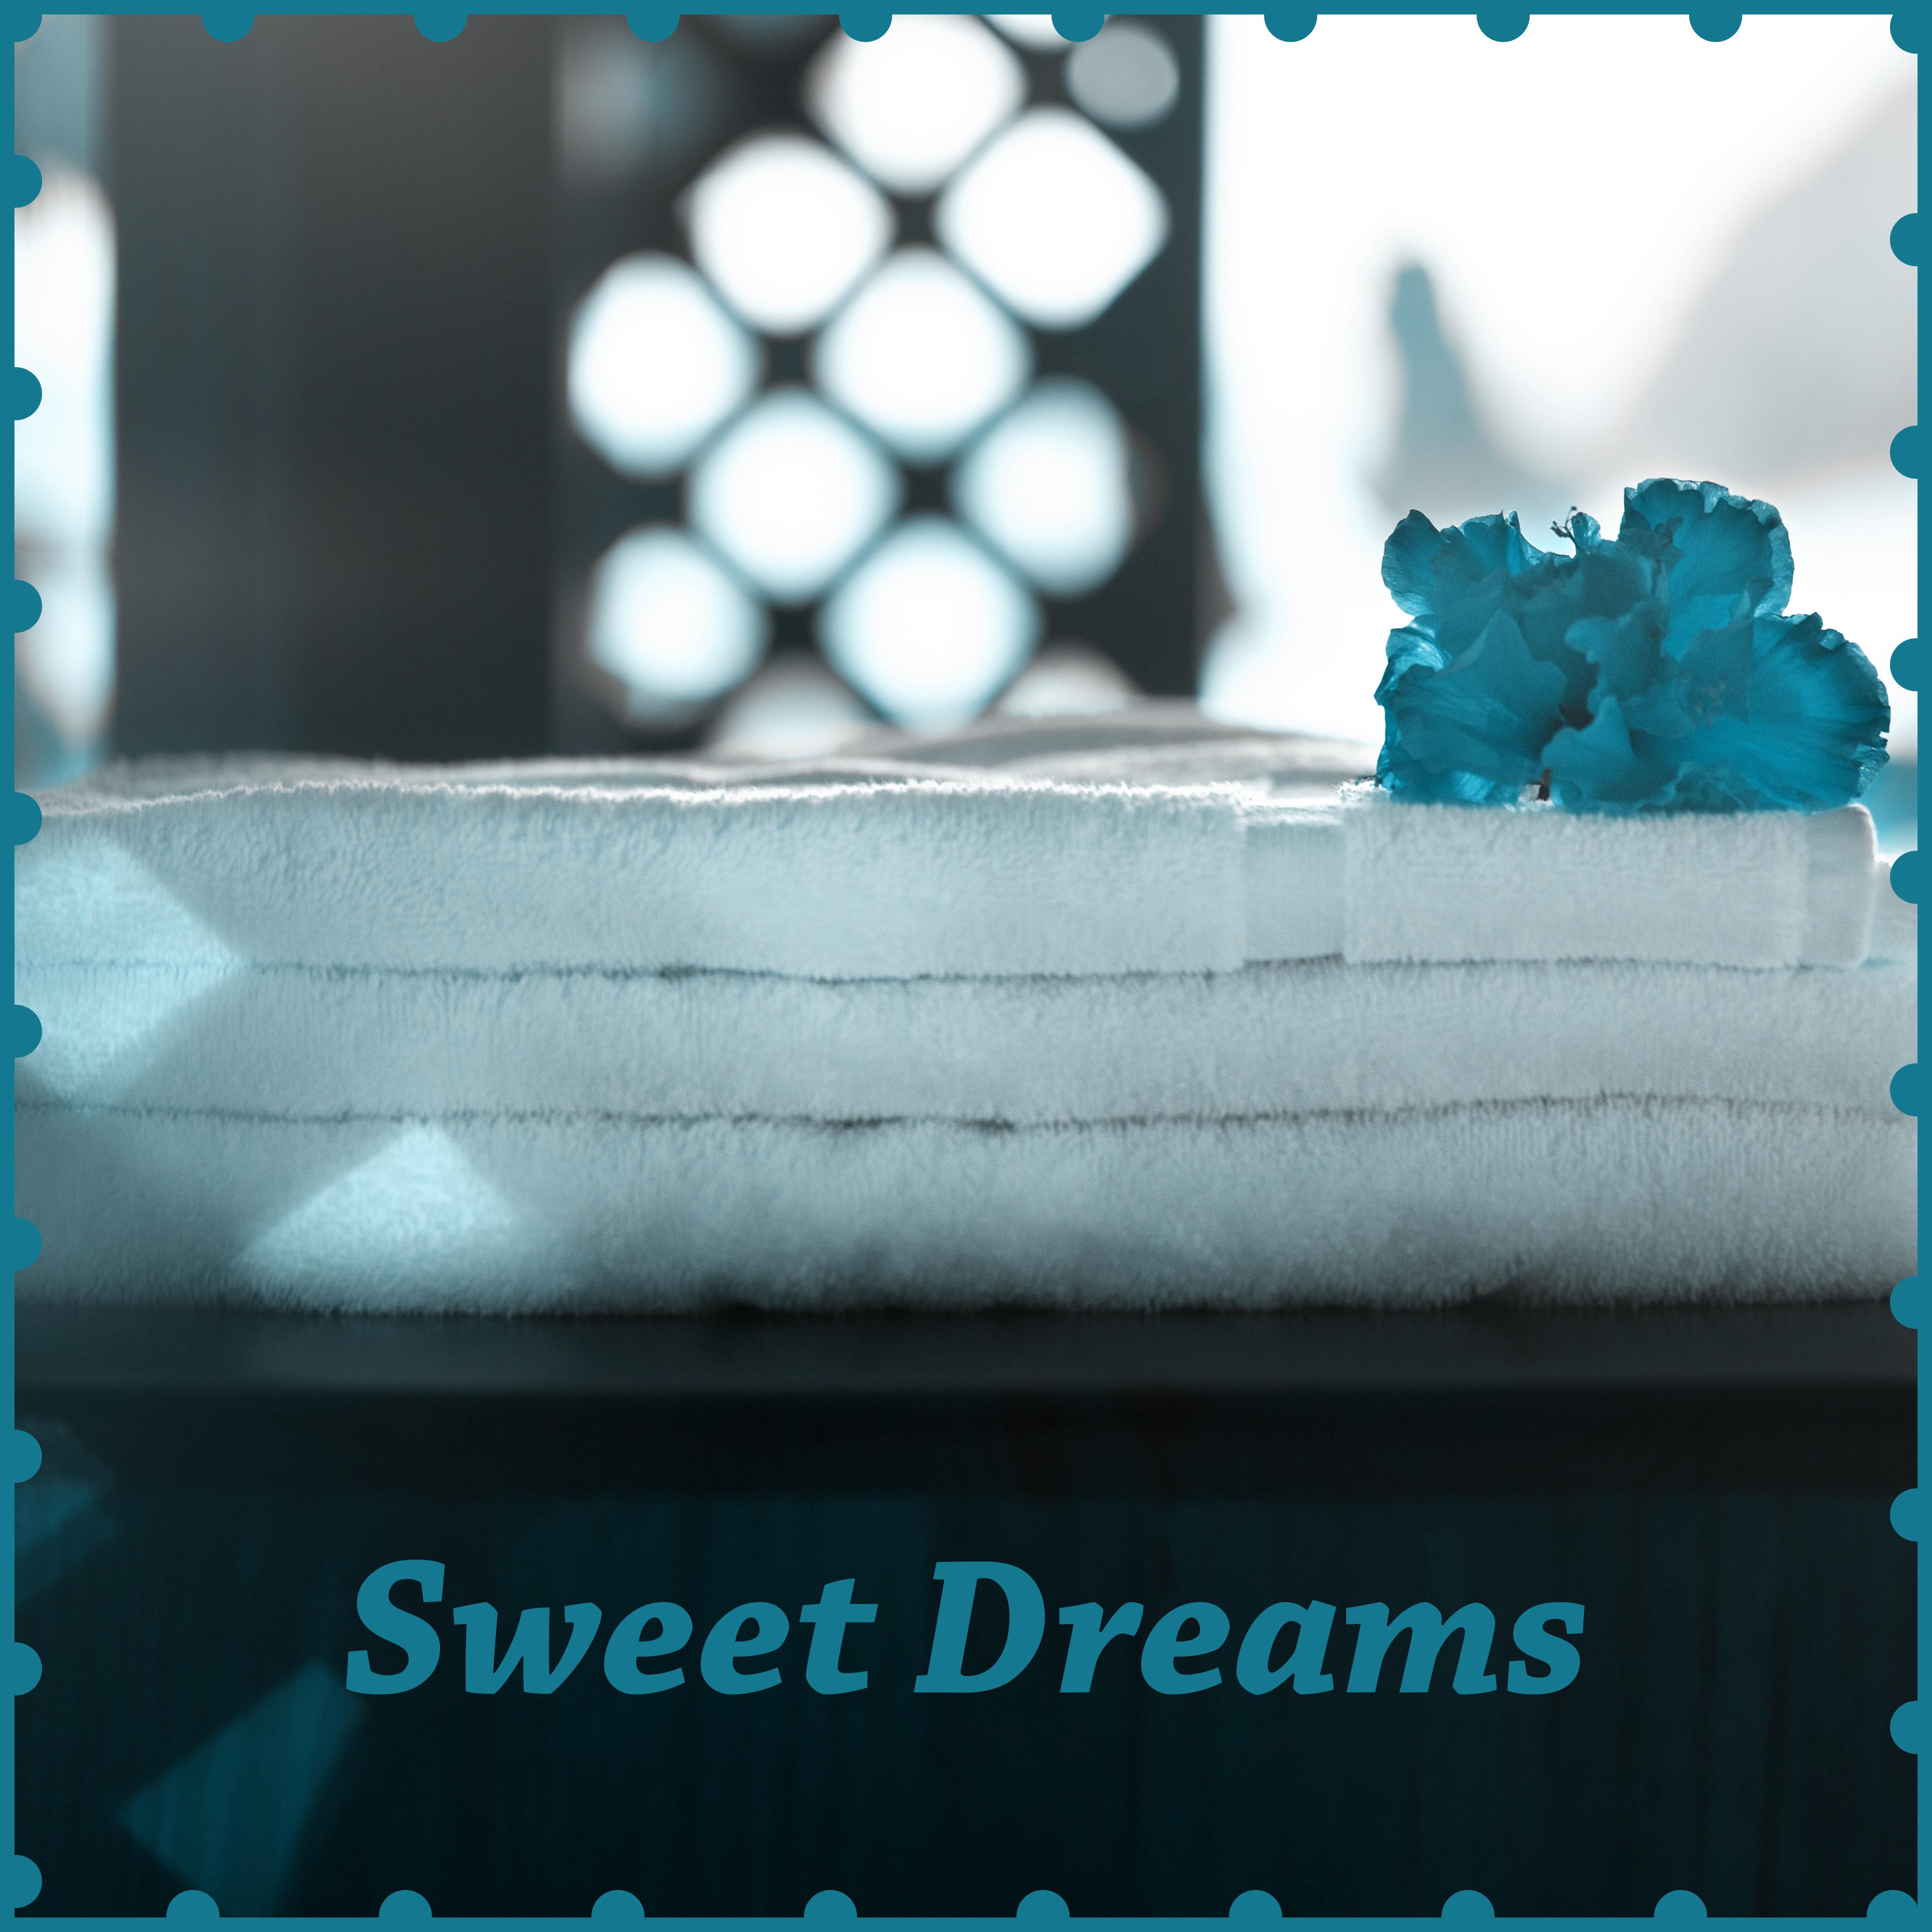 Sweet Dreams – Music for Spa, Wellness, Healing Sounds for Relaxation, Therapy in Spa, Deep Sleep, Restful Melodies